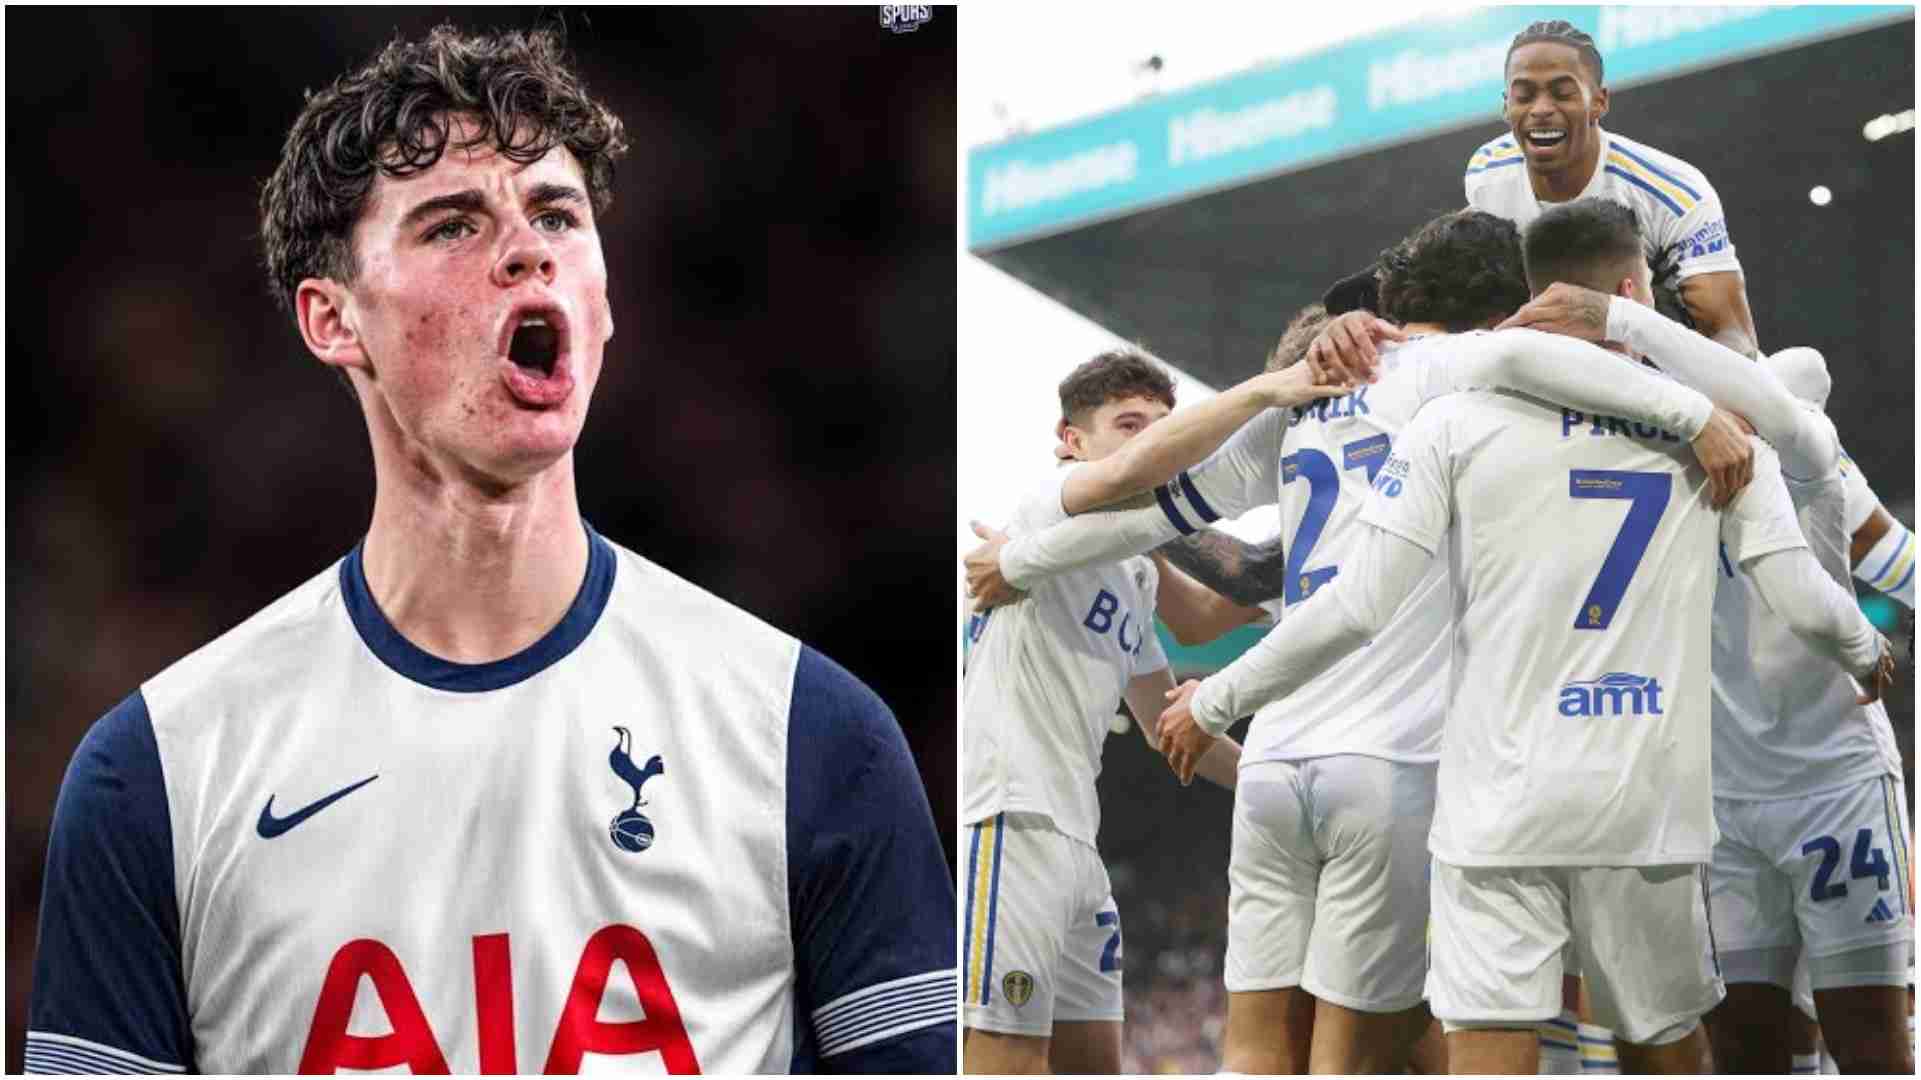 BAD NEWS – ‘Ben Jacobs’ names the next Big star at Leeds United that will EXIT the club after The Whites confirm they will Sell him on ONE CONDITION following the departure of Archie Gray to Spurs